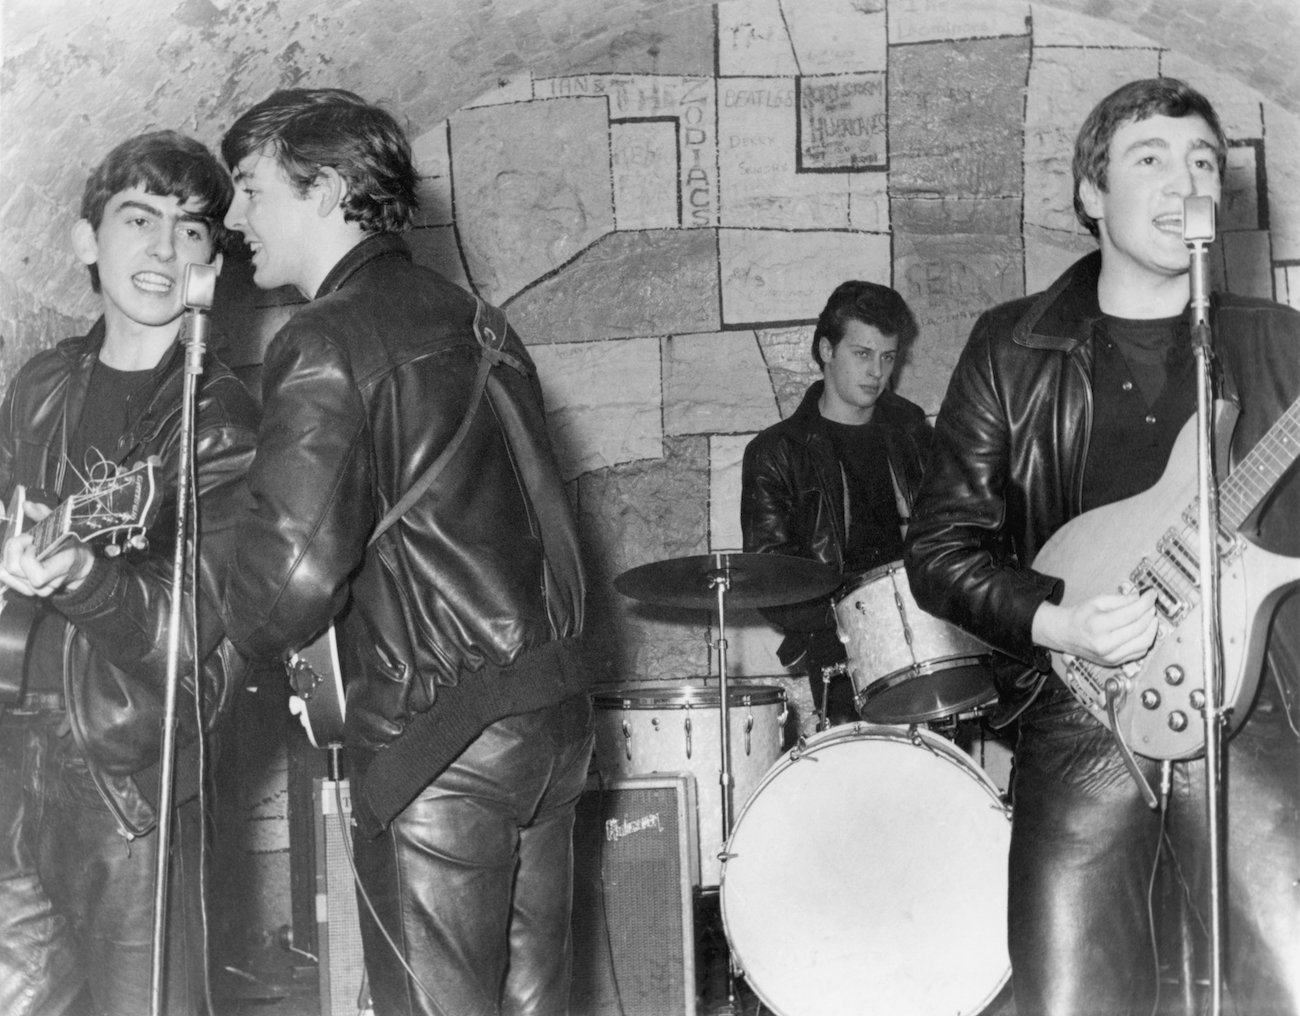 The Beatles performing at the Cavern Club in 1961.